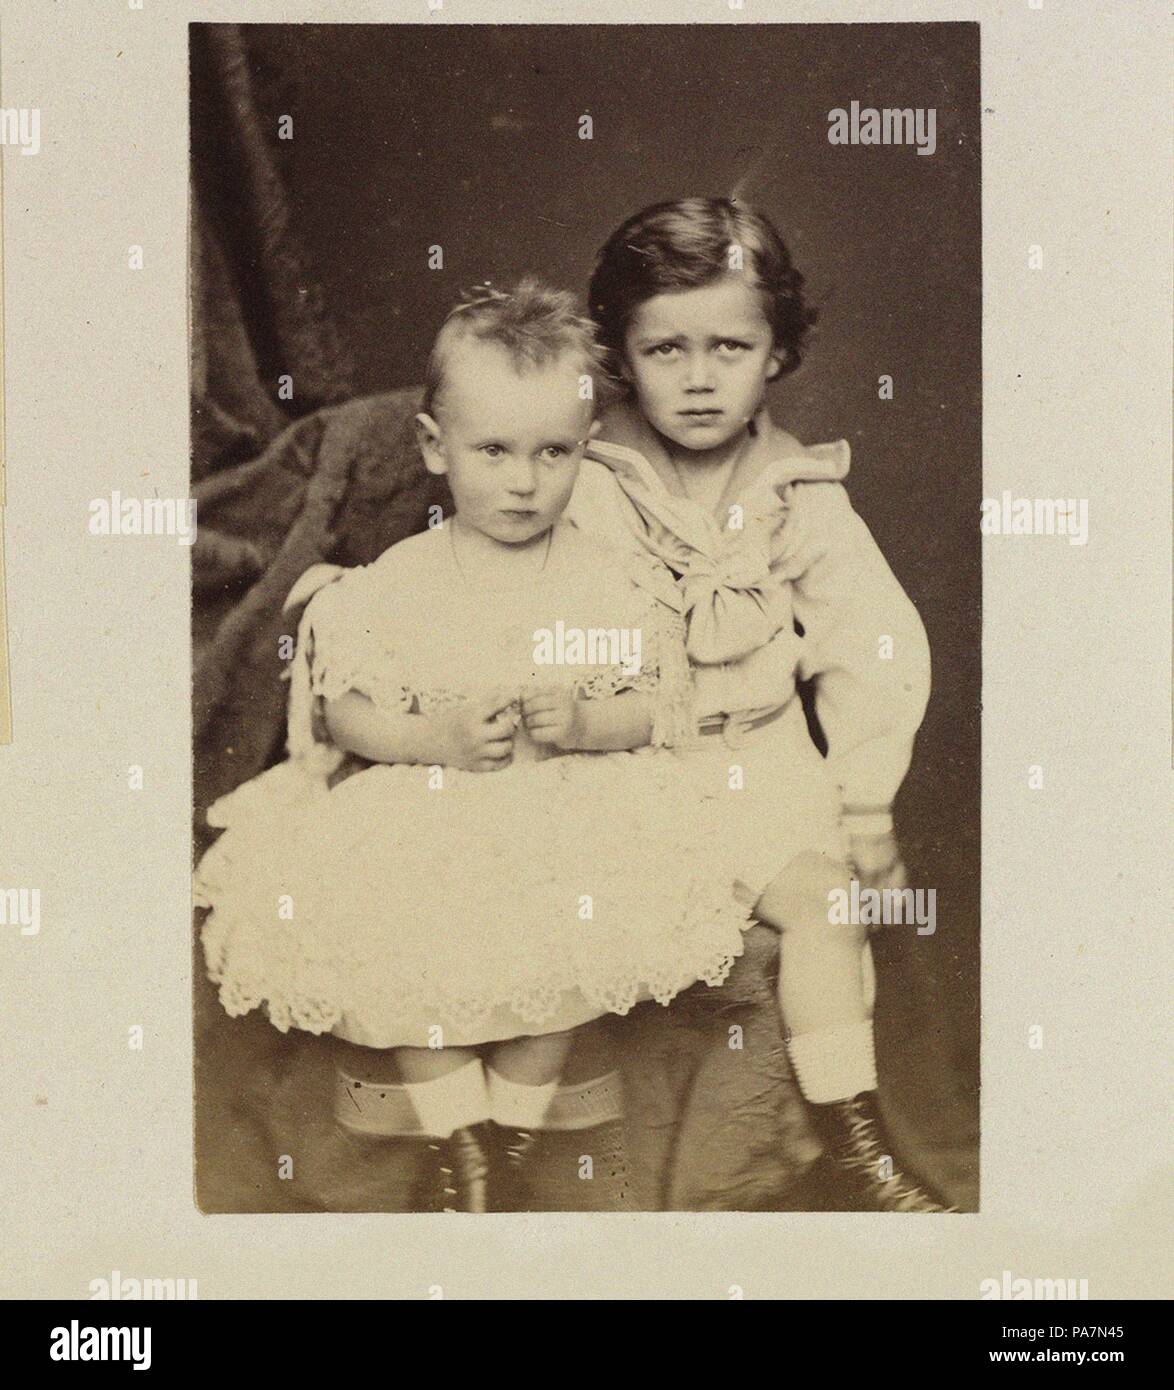 Portrait of Grand Dukes George Alexandrovich of Russia (1871-1899) and Nicholas Aleksandrovich of Russia (1868-1918) as Children. Museum: Russian State Film and Photo Archive, Krasnogorsk. Stock Photo